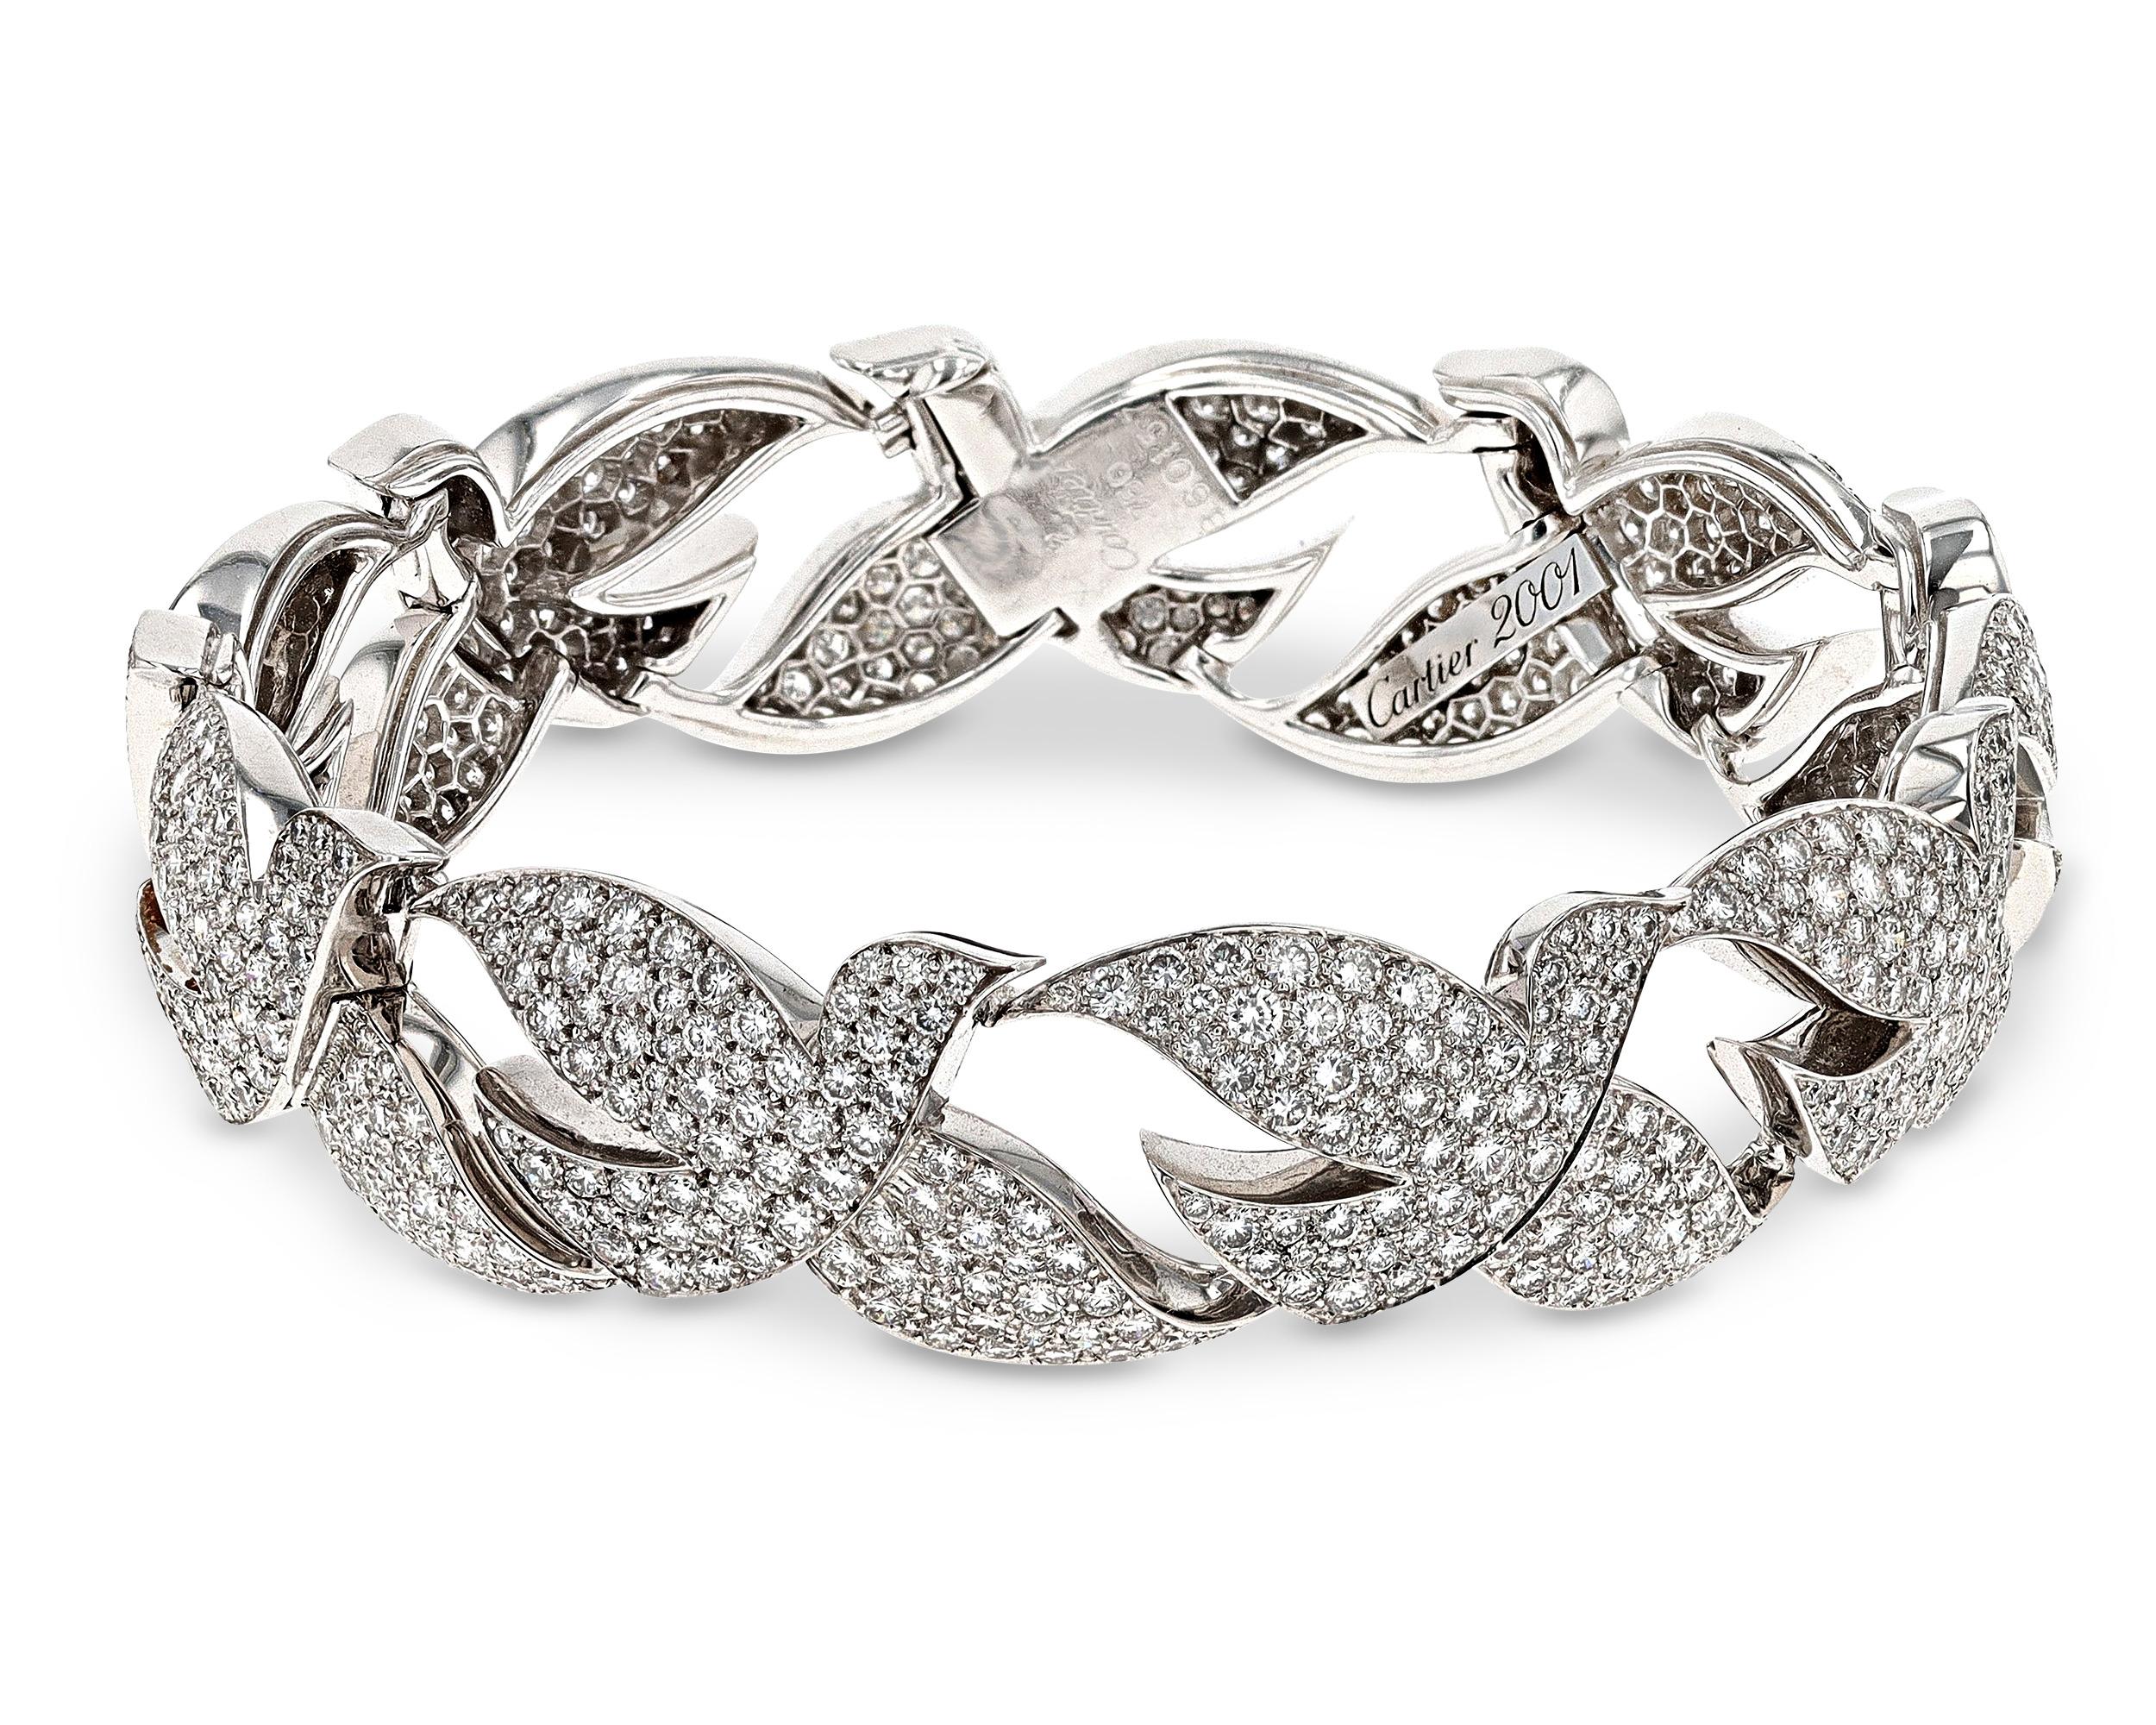 Taking the form of a string of peaceful doves spreading their wings across the wearer’s wrist, this unique bracelet was crafted by the inimitable Cartier. The birds are studded with approximately 12.00 carats of sparkling white diamonds set in chic